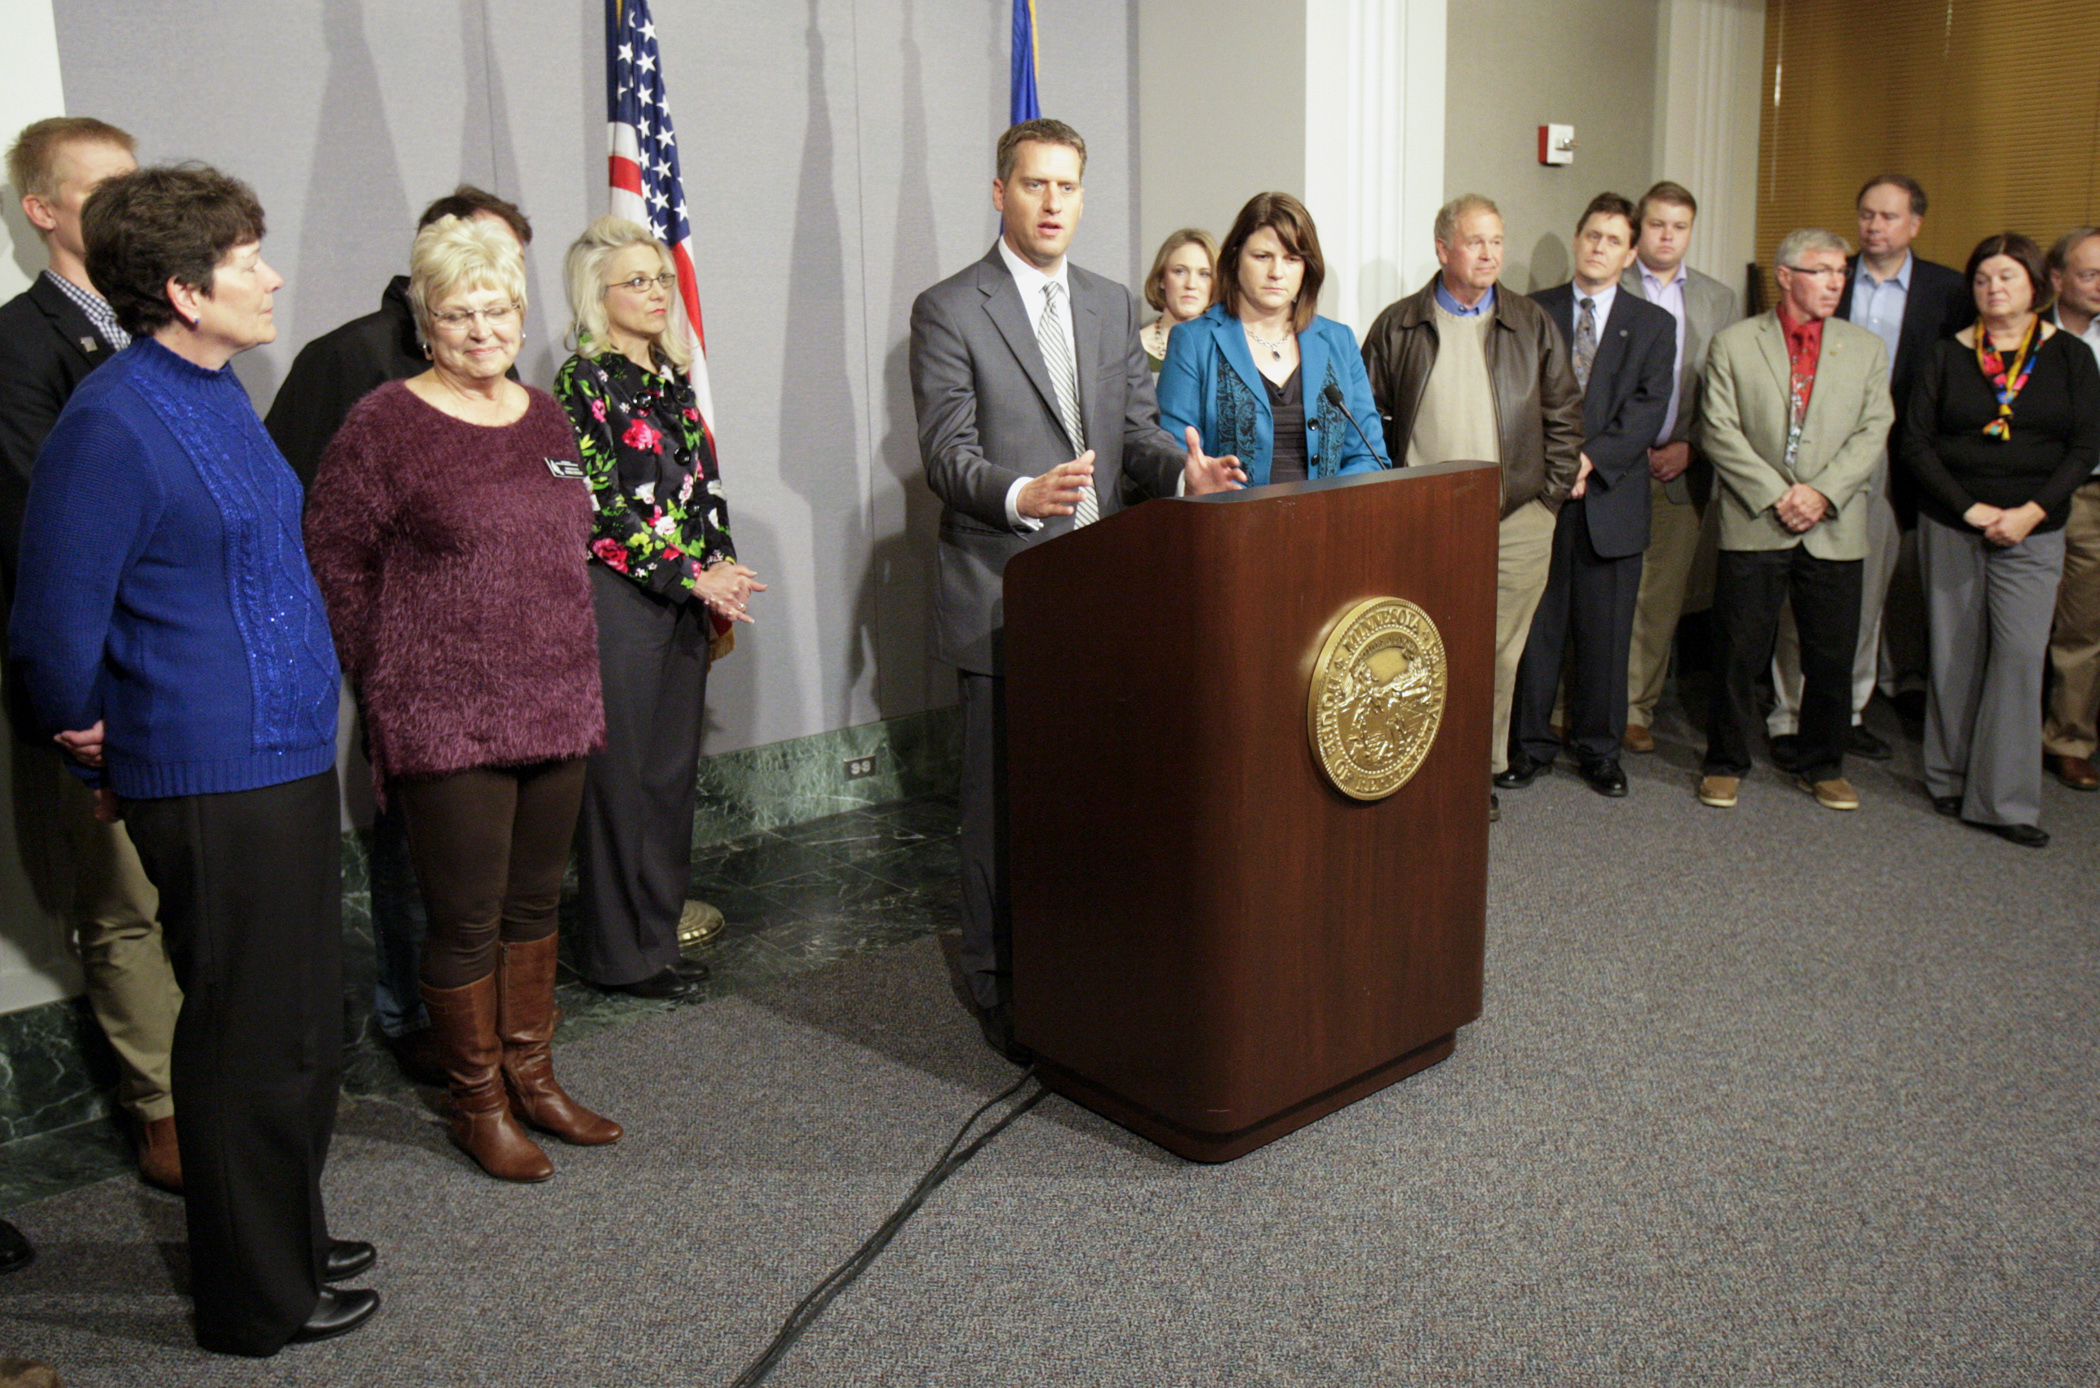 House Speaker-designate Kurt Daudt and House Majority Leader-elect Joyce Peppin are surrounded by members of the Republican caucus at a Nov. 7 news conference after their leadership elections. Photo by Paul Battaglia